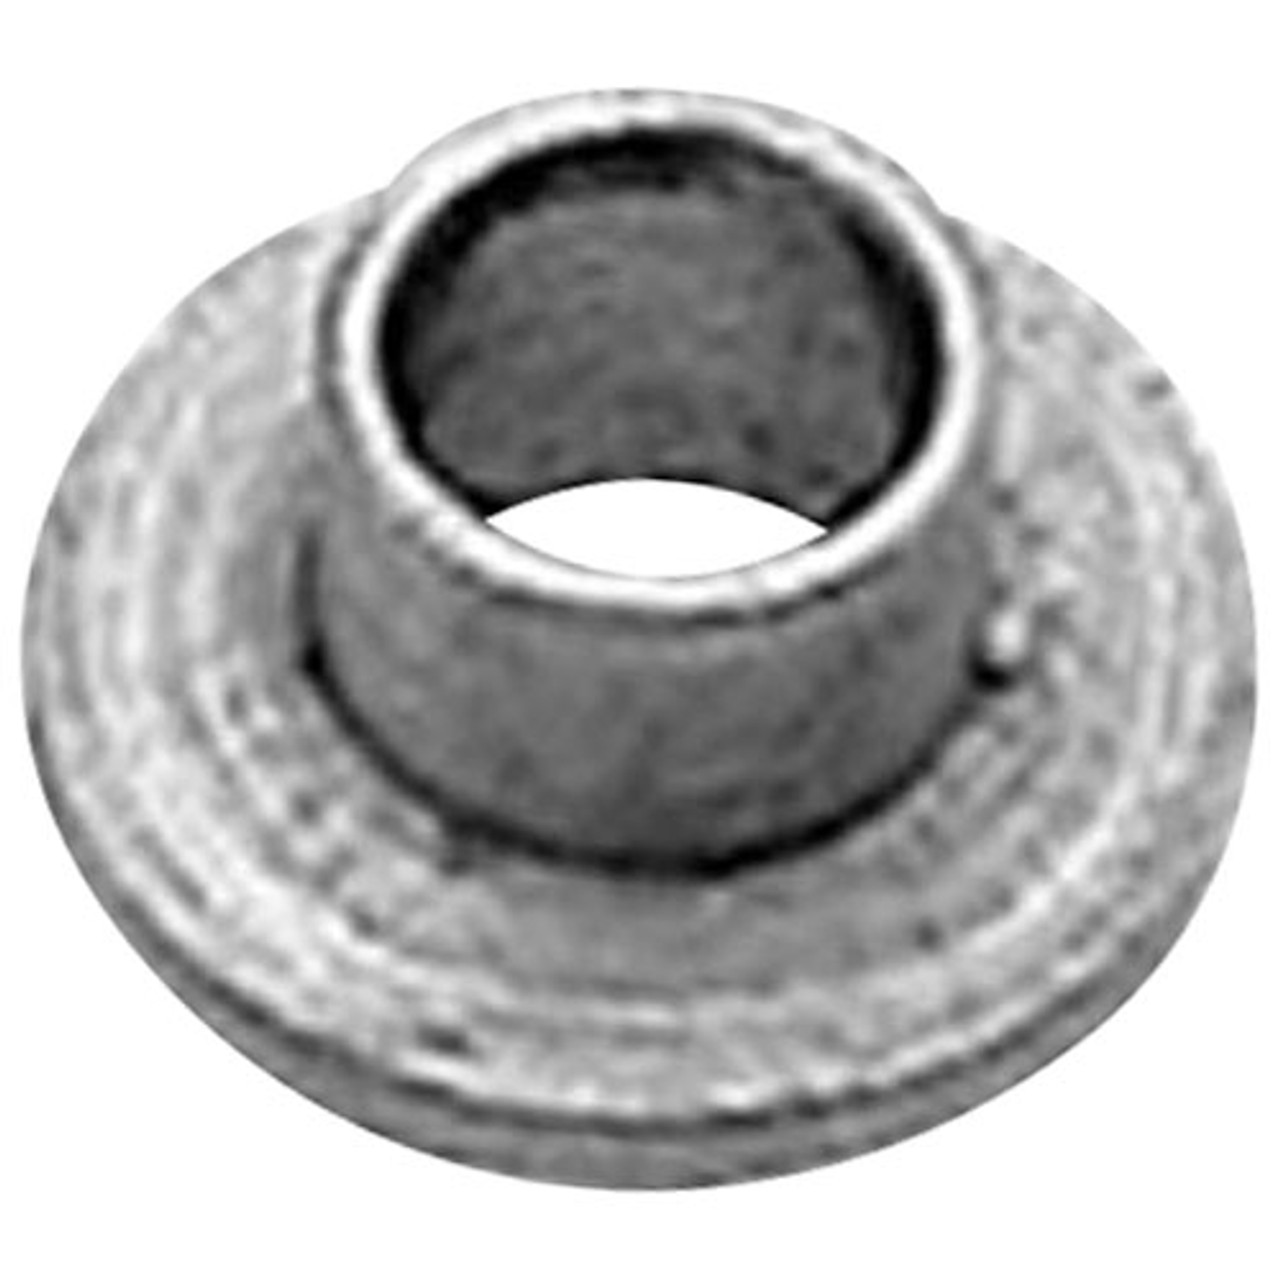 Washer - Replacement Part For Franklin Chef TA5